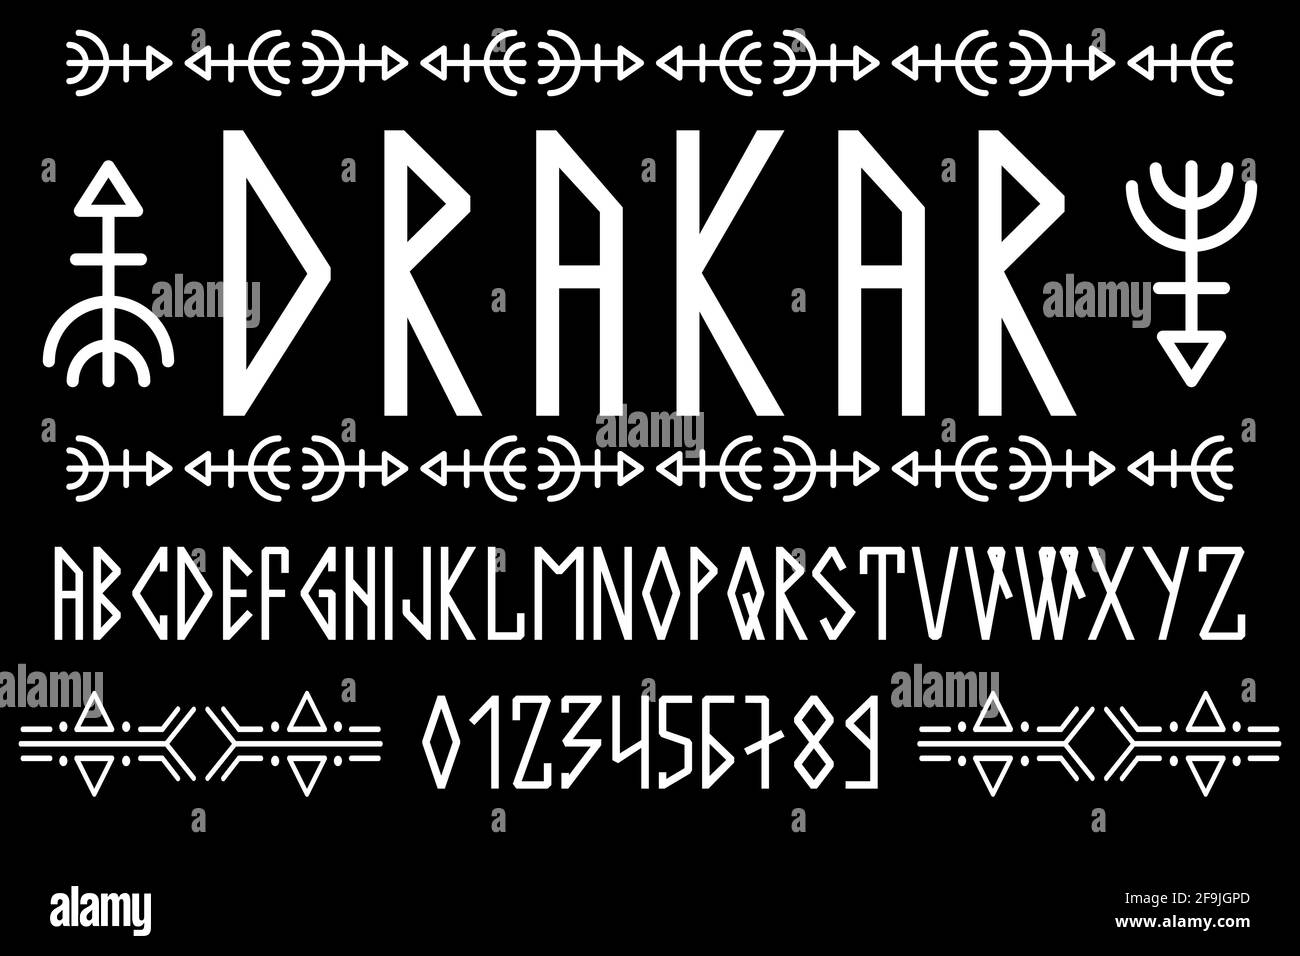 Scandinavian script, in capital letters in the style of nordic runes. Modern design. A magical rune font in the ethnic style of the northern peoples Stock Vector